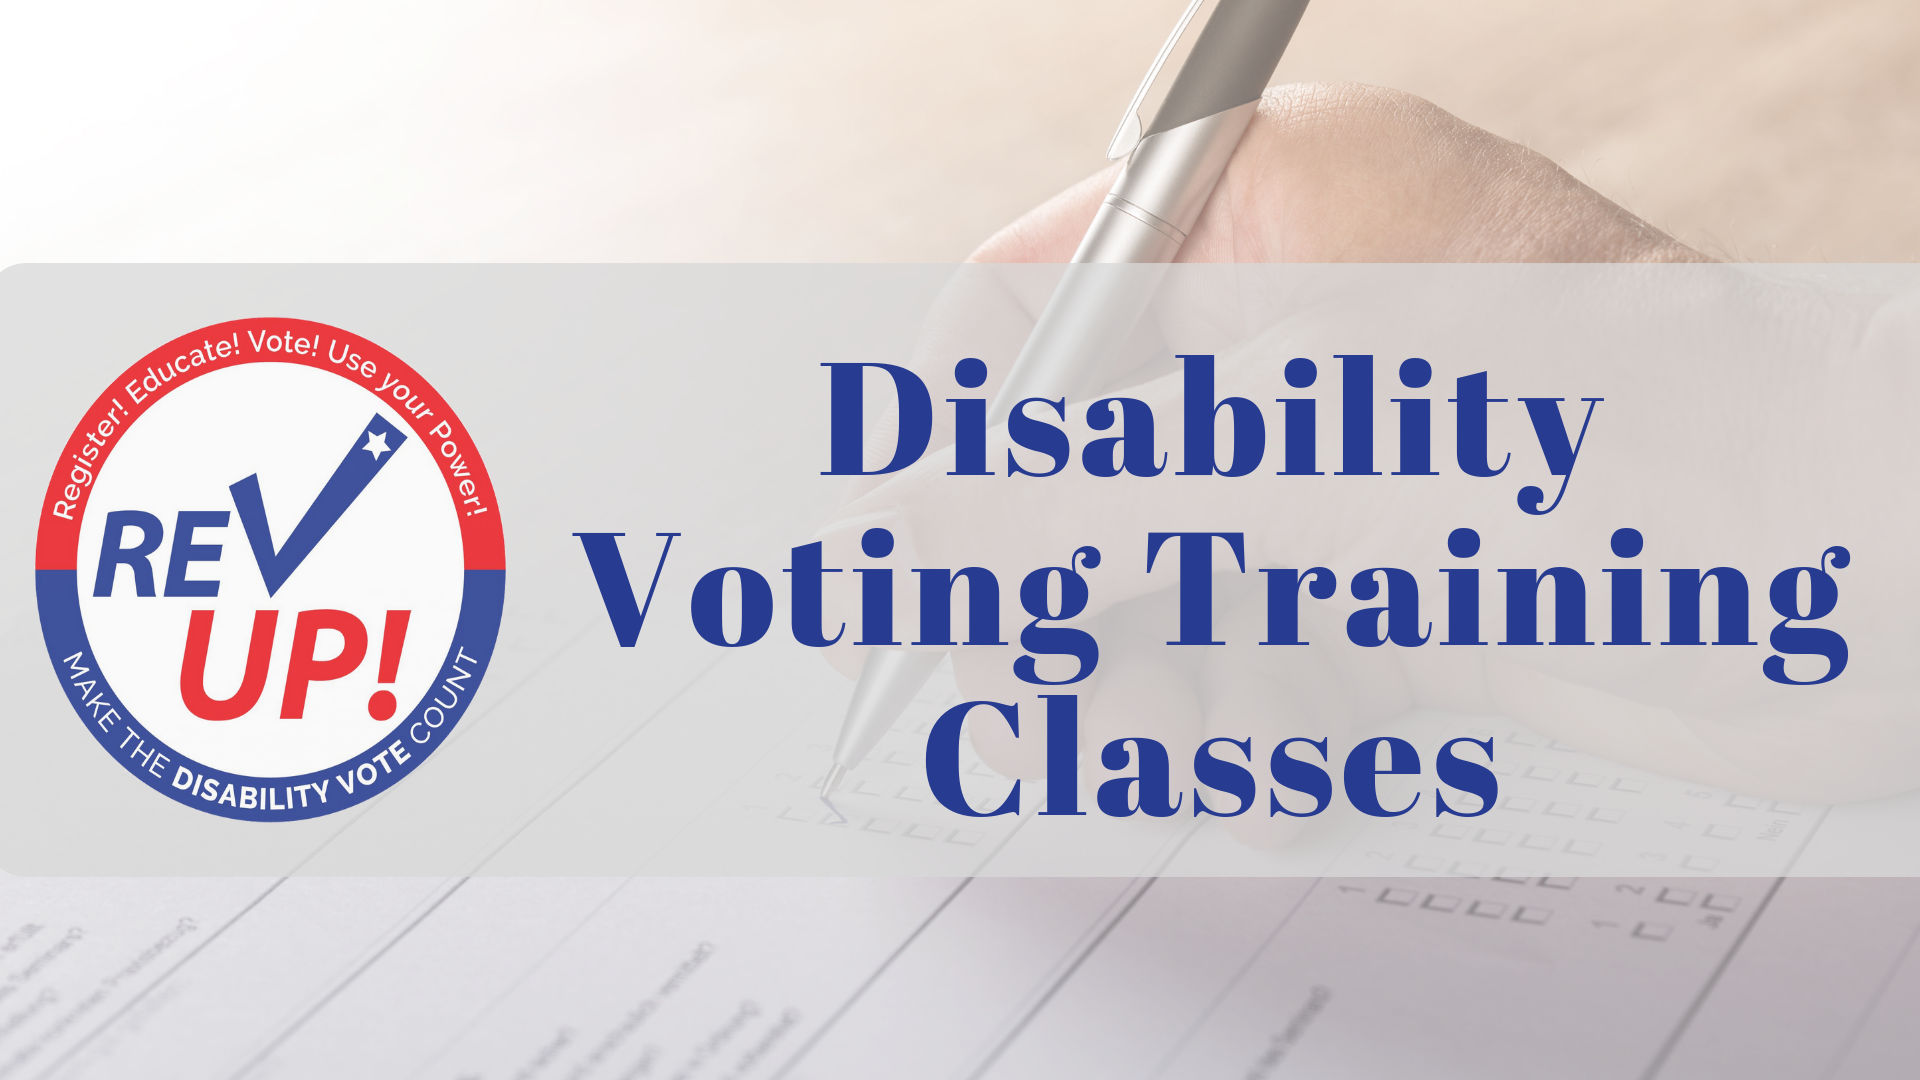 Event Header: background photo of a person's hand holding a pen, checking a box on a paper ballot. Overlaid on the photo is a text box that reads: Disability Voting Training Classes. Next to the text is the REV Up logo on the left.